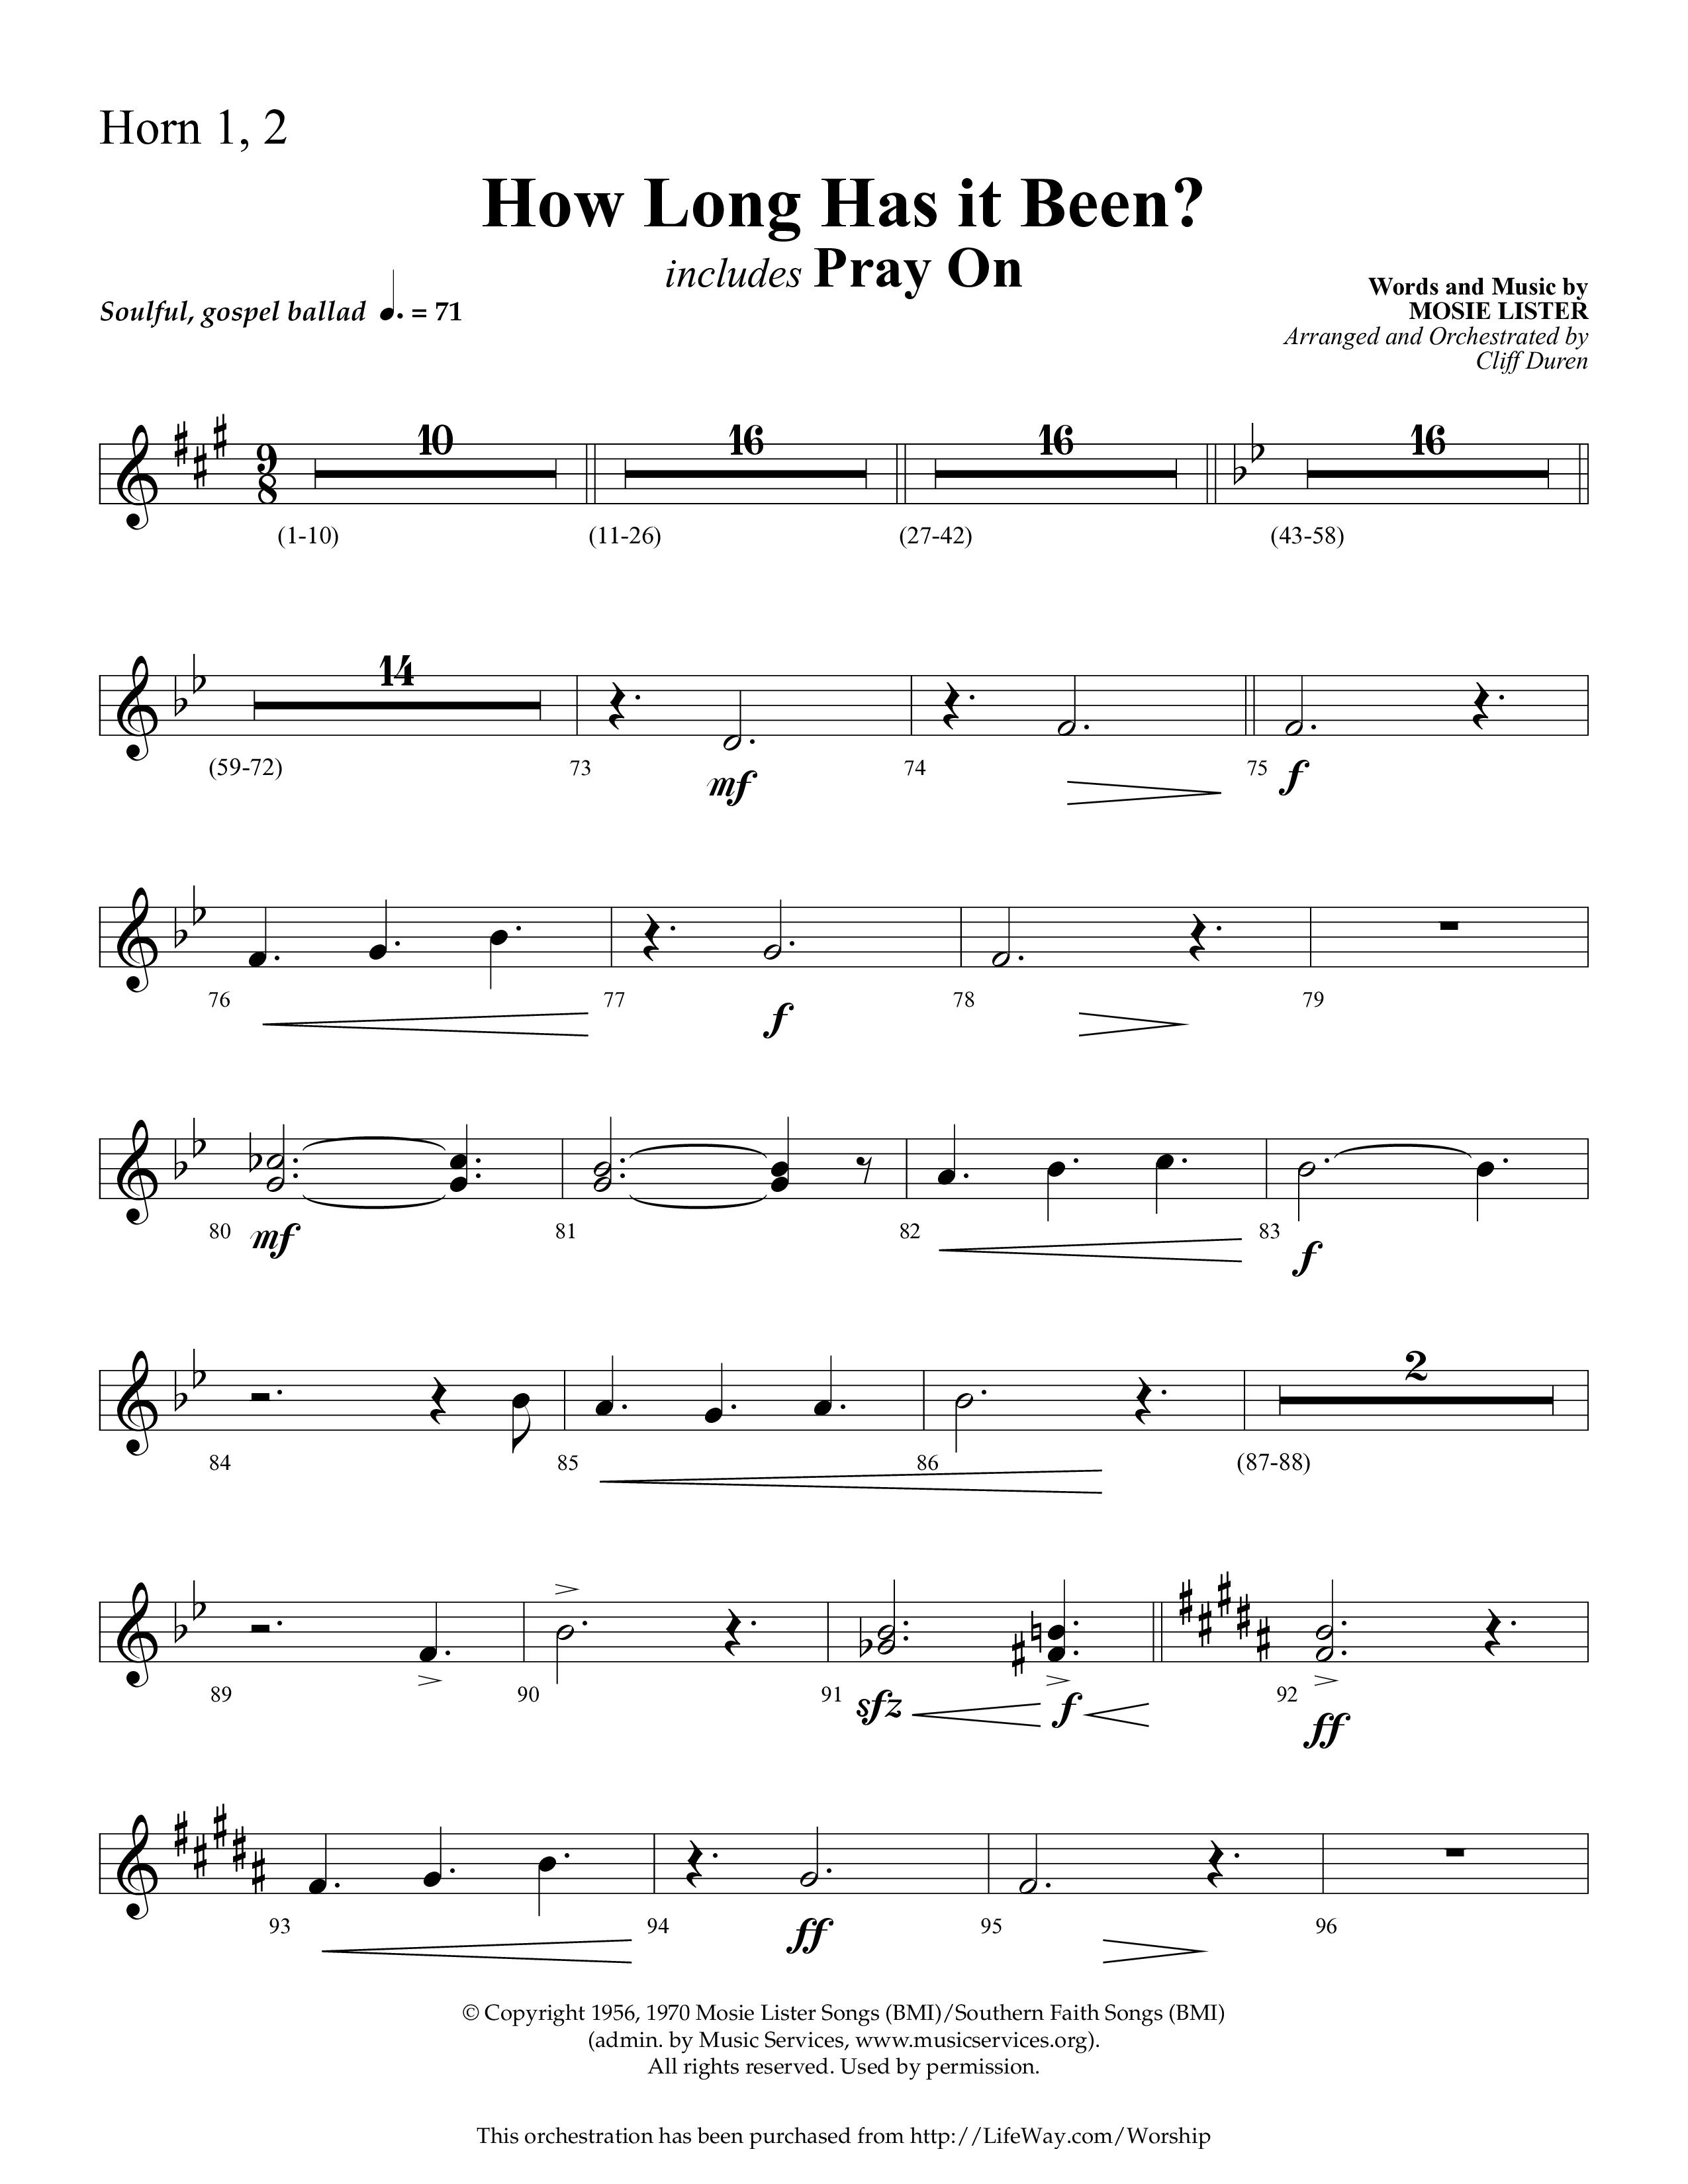 How Long Has It Been (with Pray On) (Choral Anthem SATB) French Horn 1/2 (Lifeway Choral / Arr. Cliff Duren)